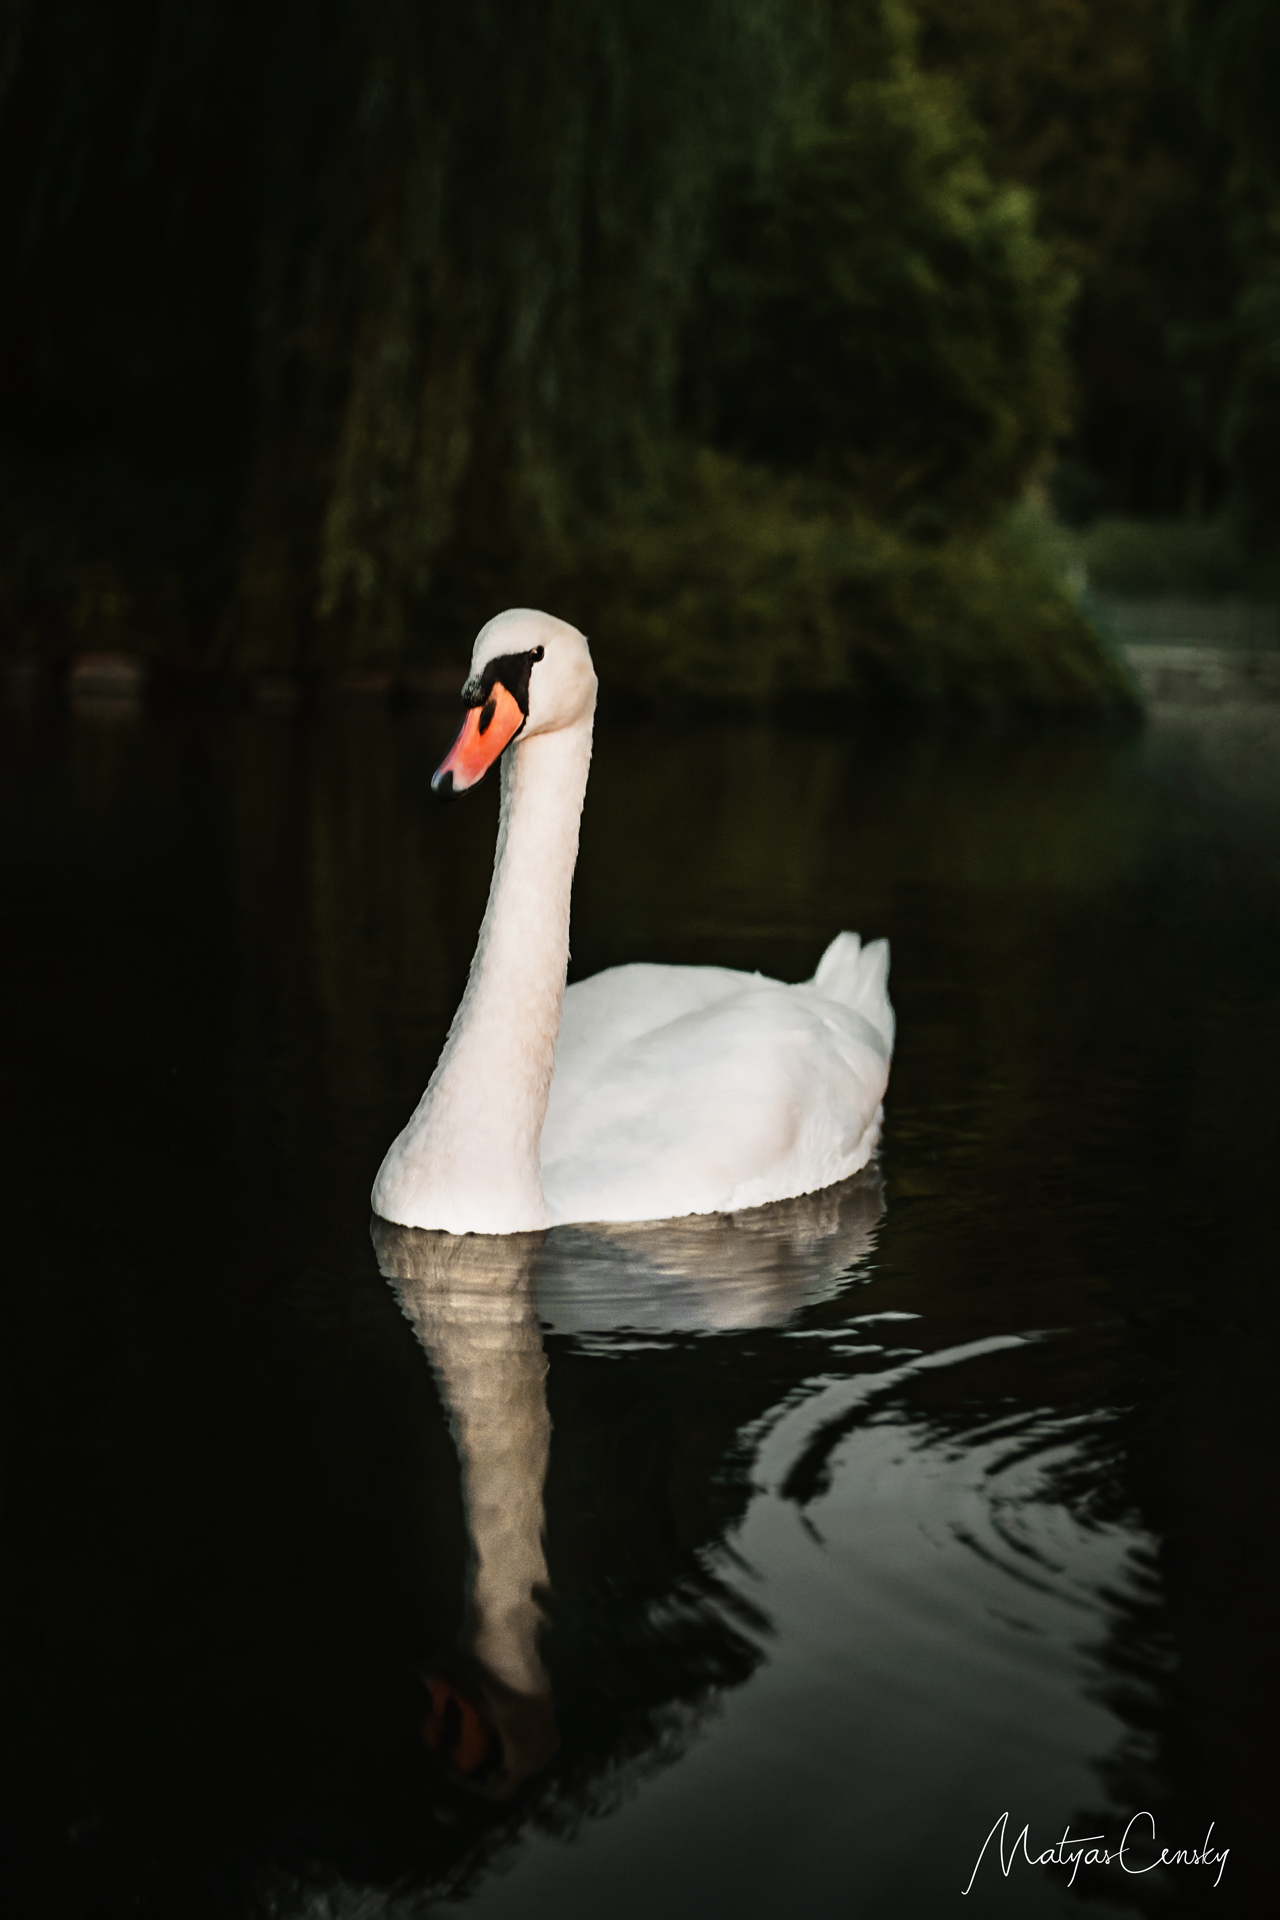 Photo of a swan in a pond with reflection.